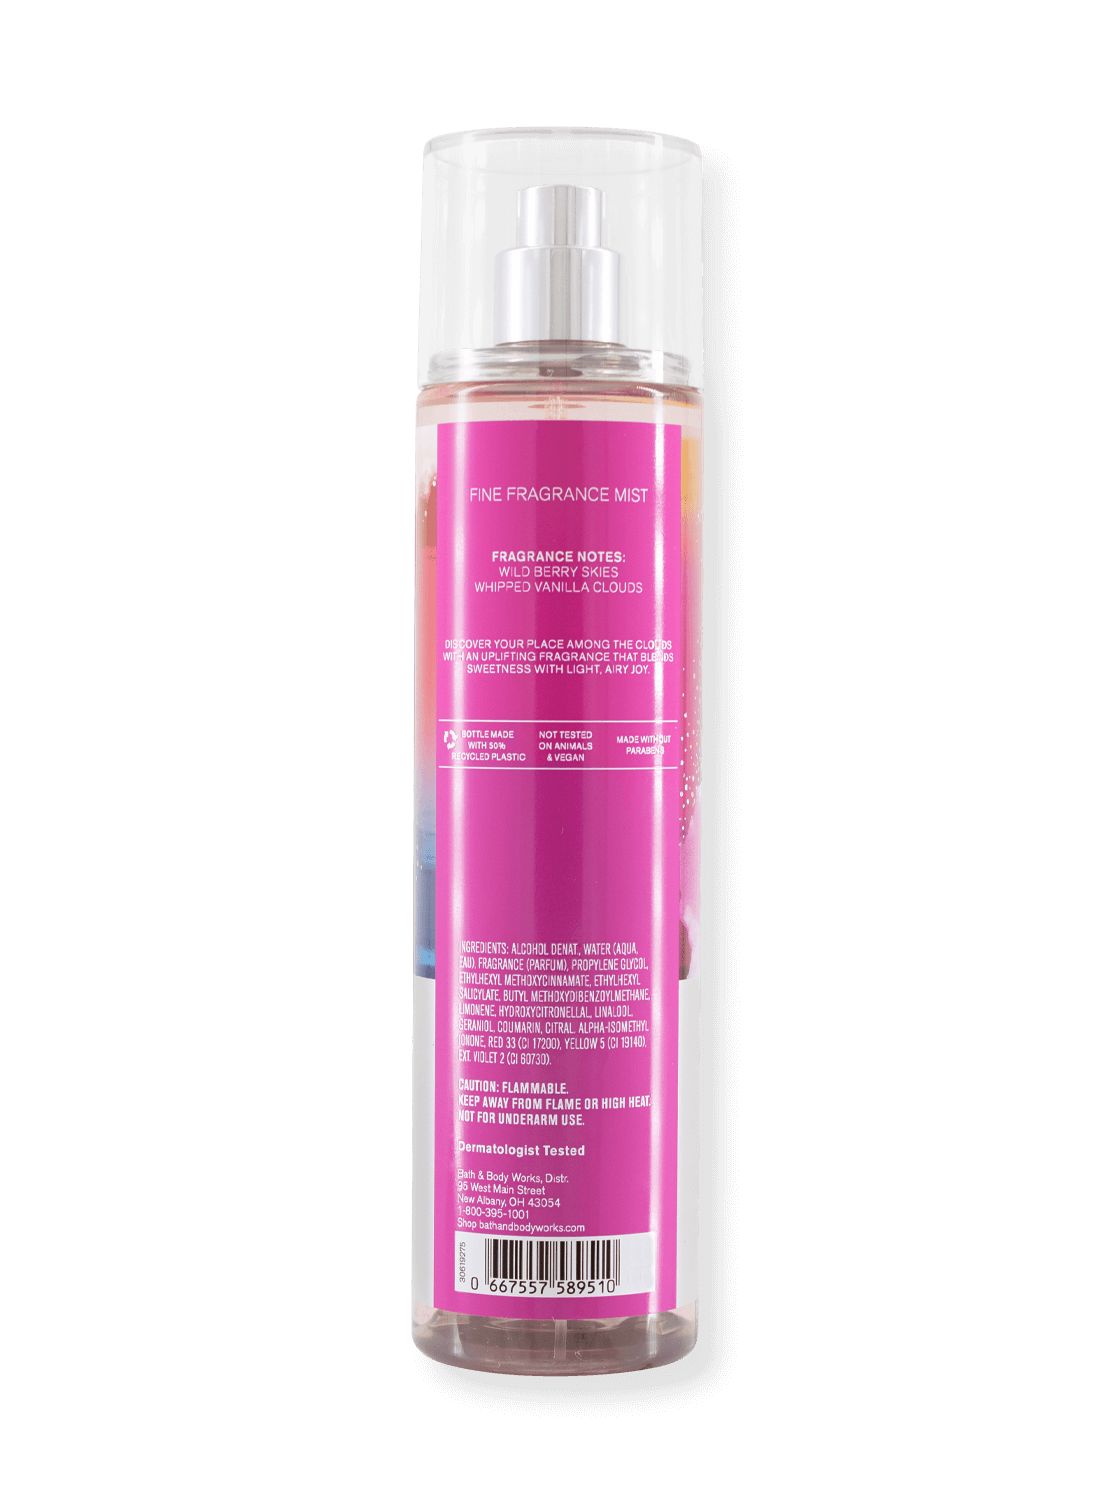 Body Spray - Among the Clouds / Between the Clouds - 236ml 